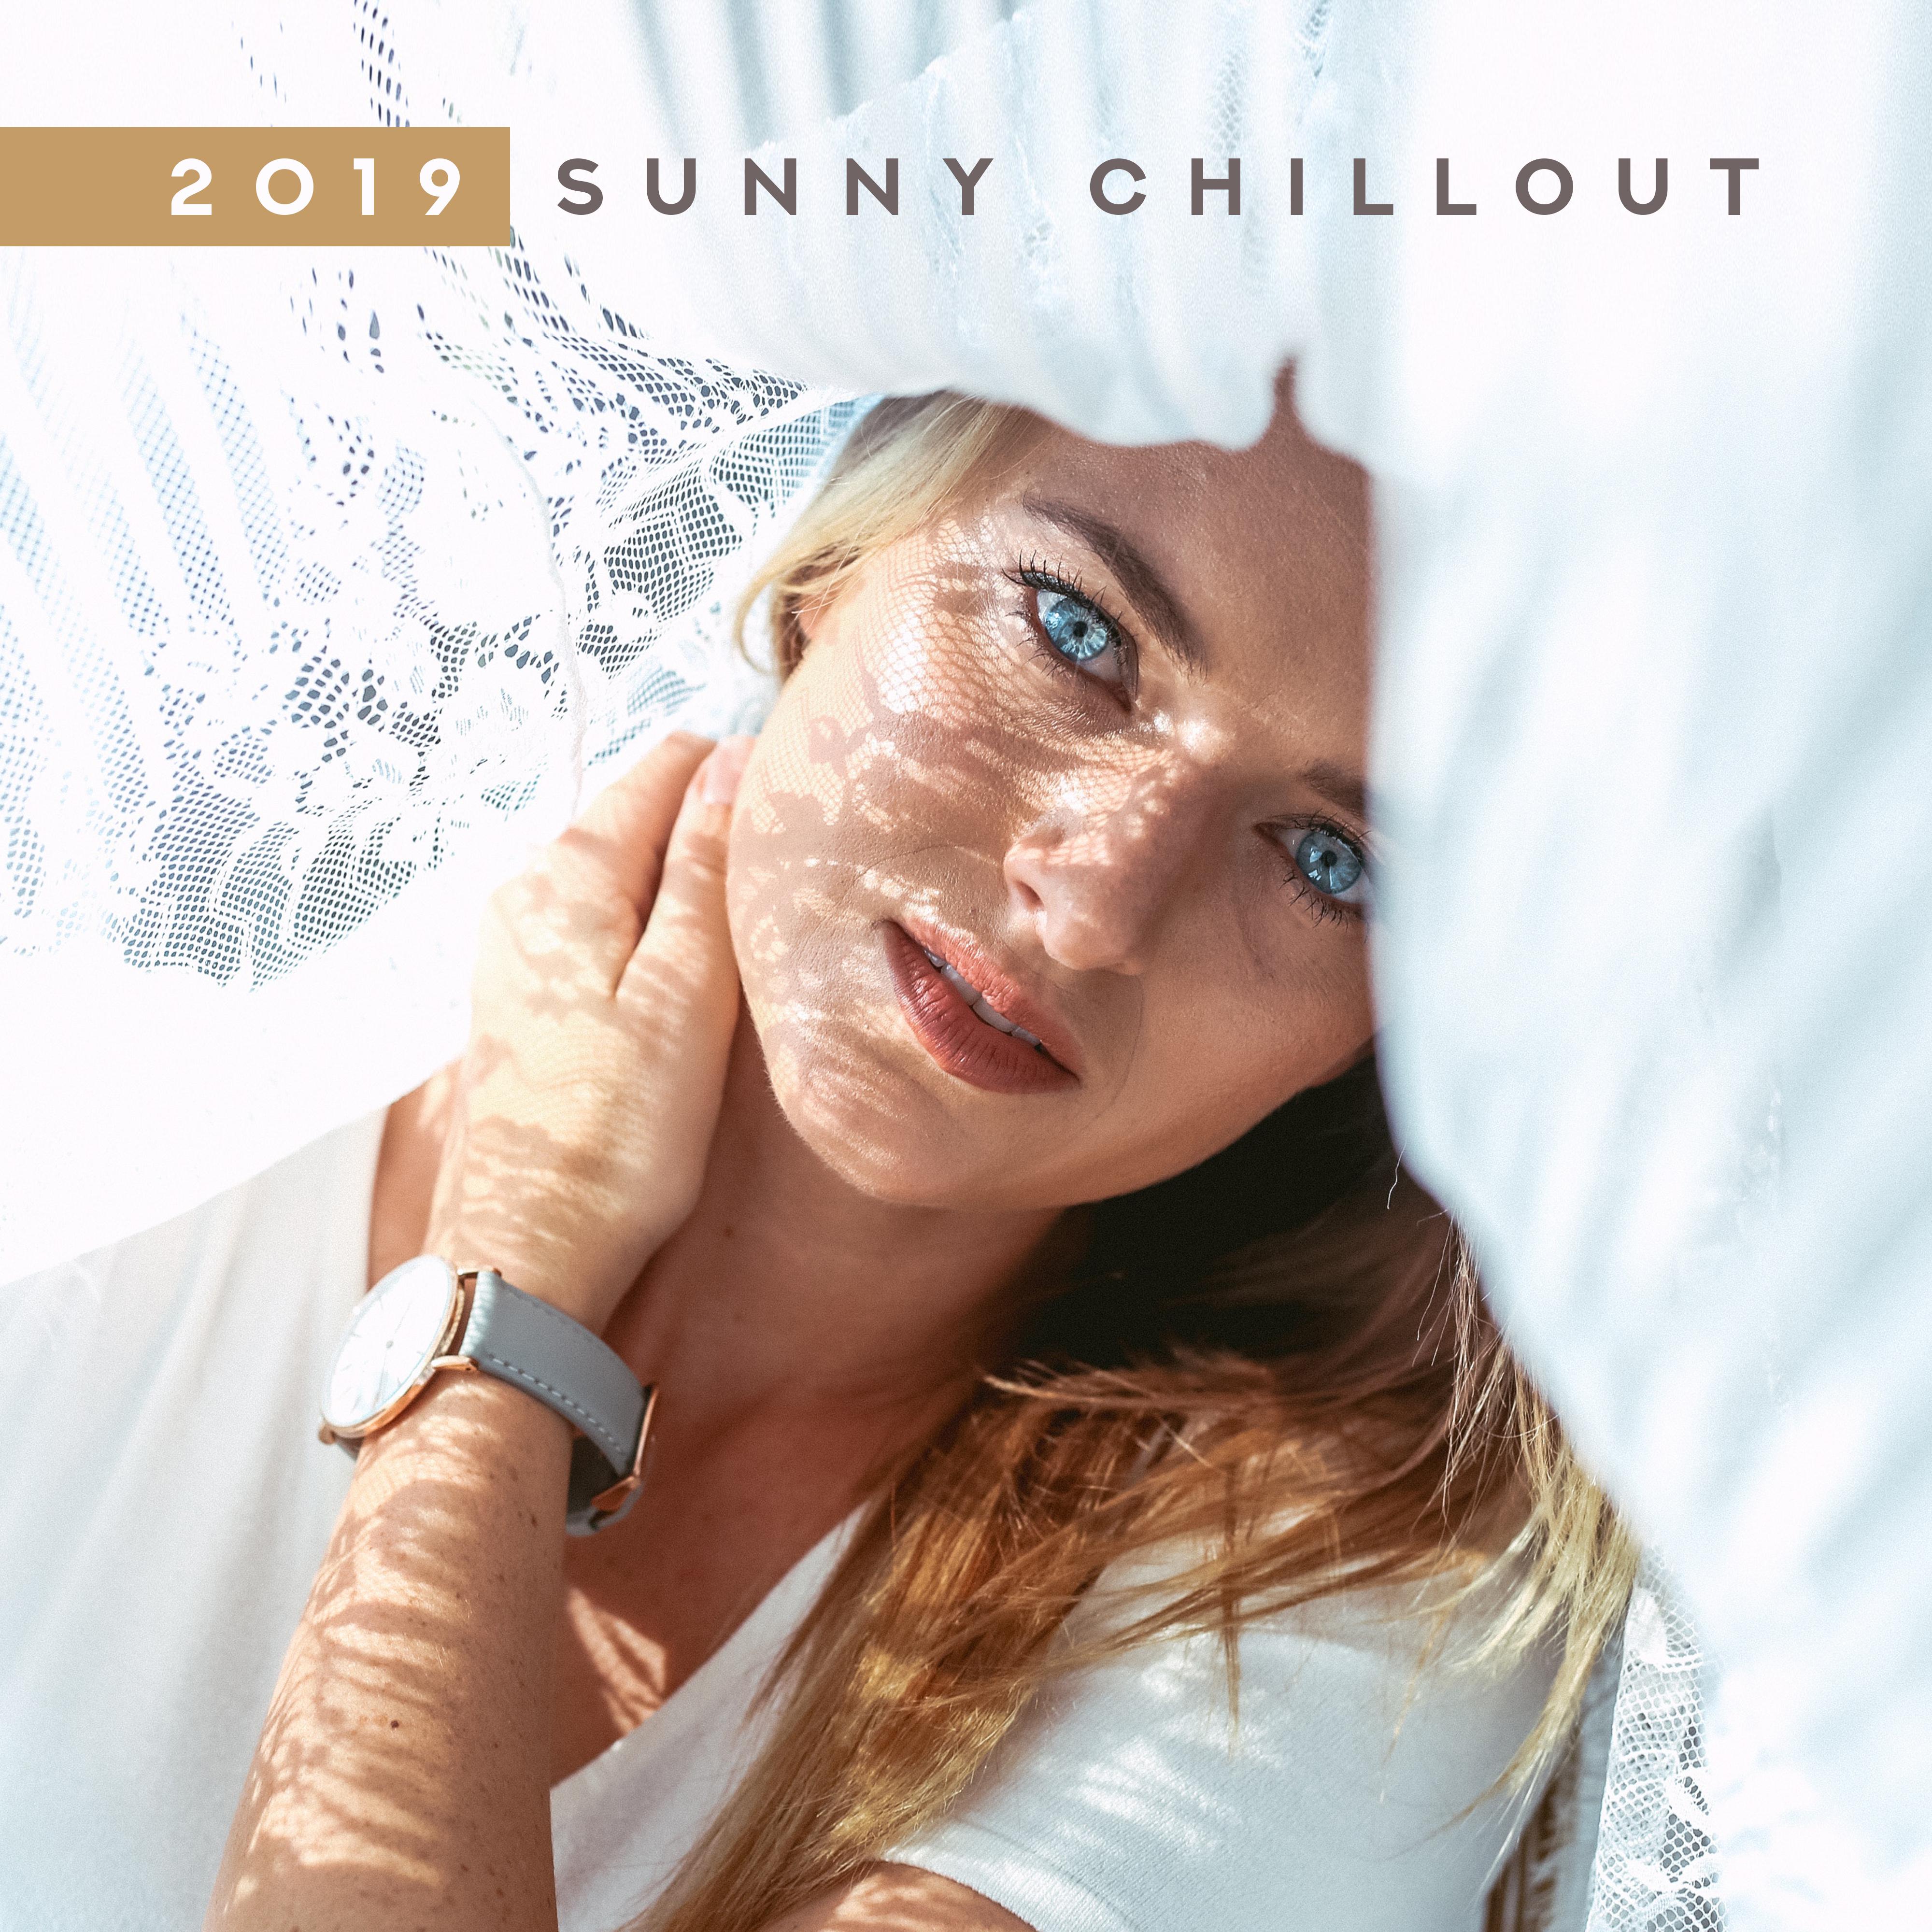 2019 Sunny Chillout: Ibiza Lounge, Perfect Relax Zone, Cocktail Music, Chillout Bar, Chillout Holiday Noises, Ibiza Chill Out